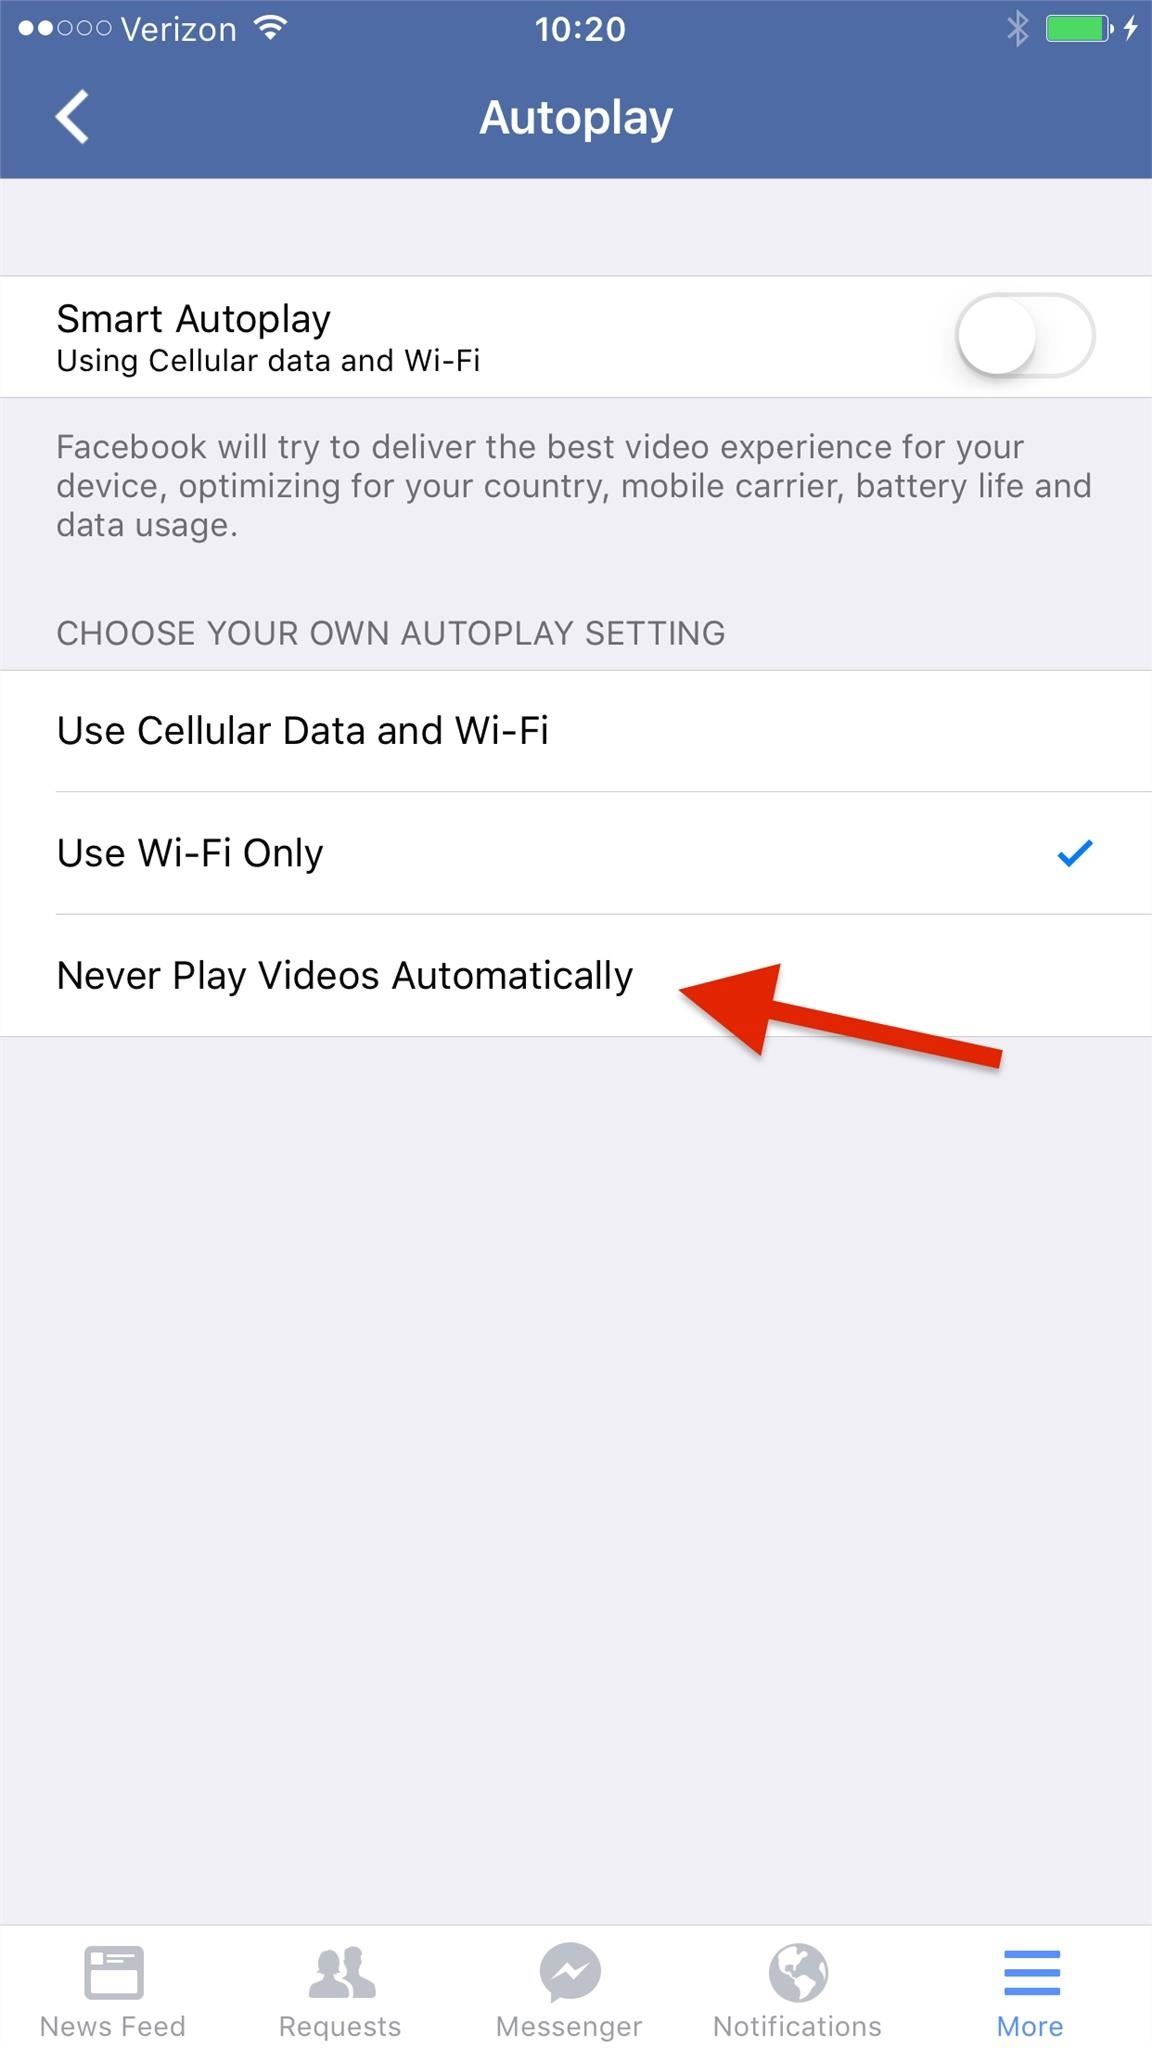 How to Disable Those Annoying Auto-Play Videos on Facebook